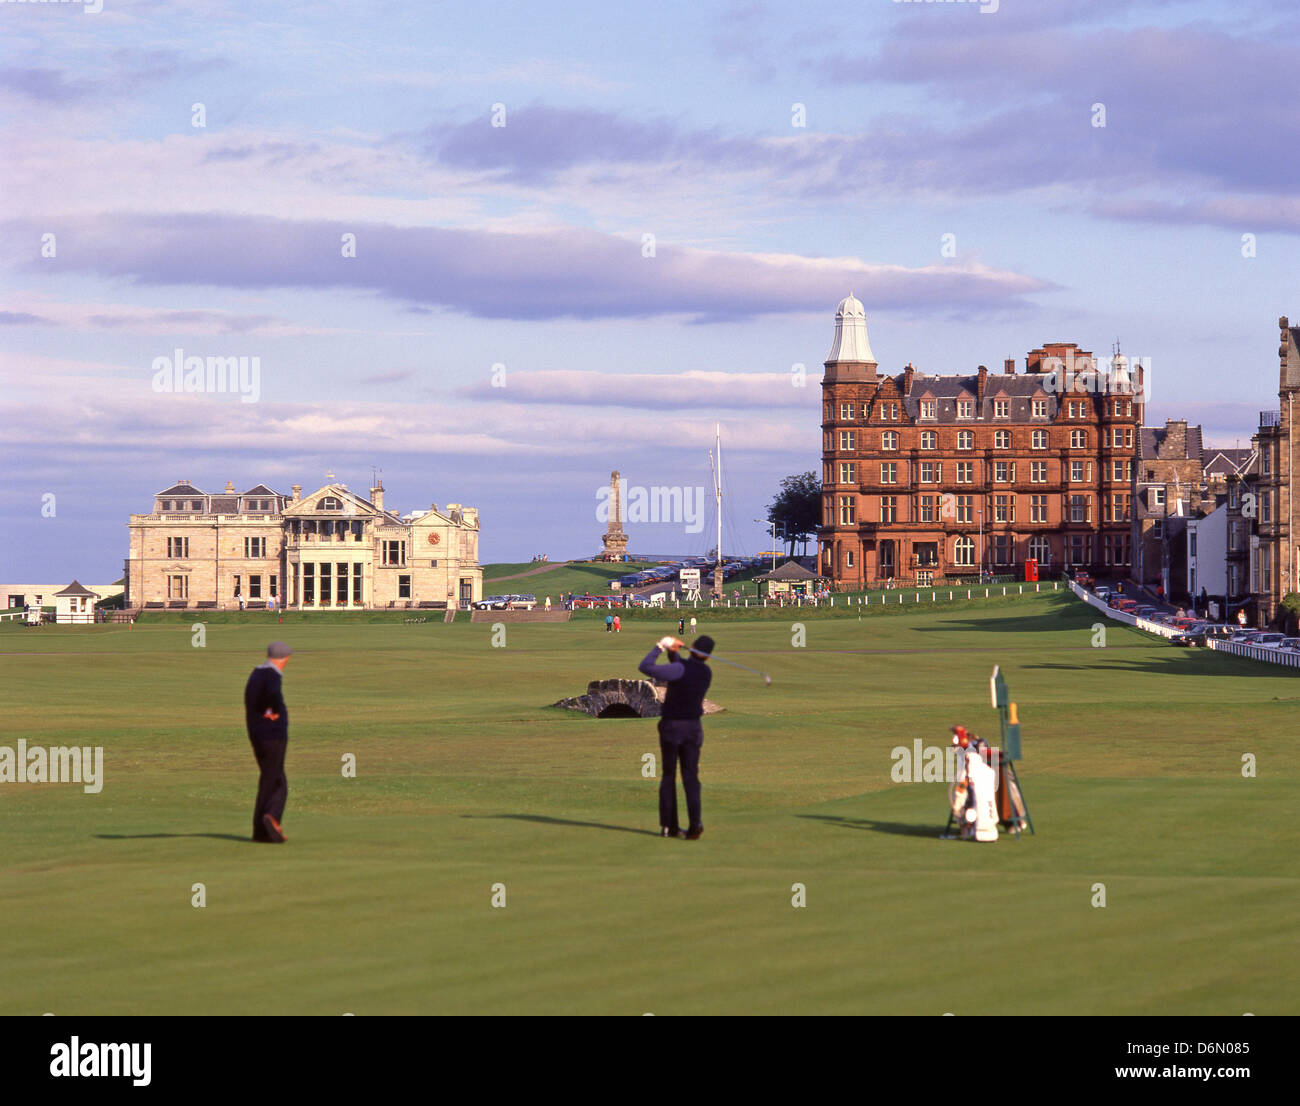 Clubhouse and 18th hole at The Old Course at St Andrews, St Andrews, Fife, Scotland, United Kingdom Stock Photo